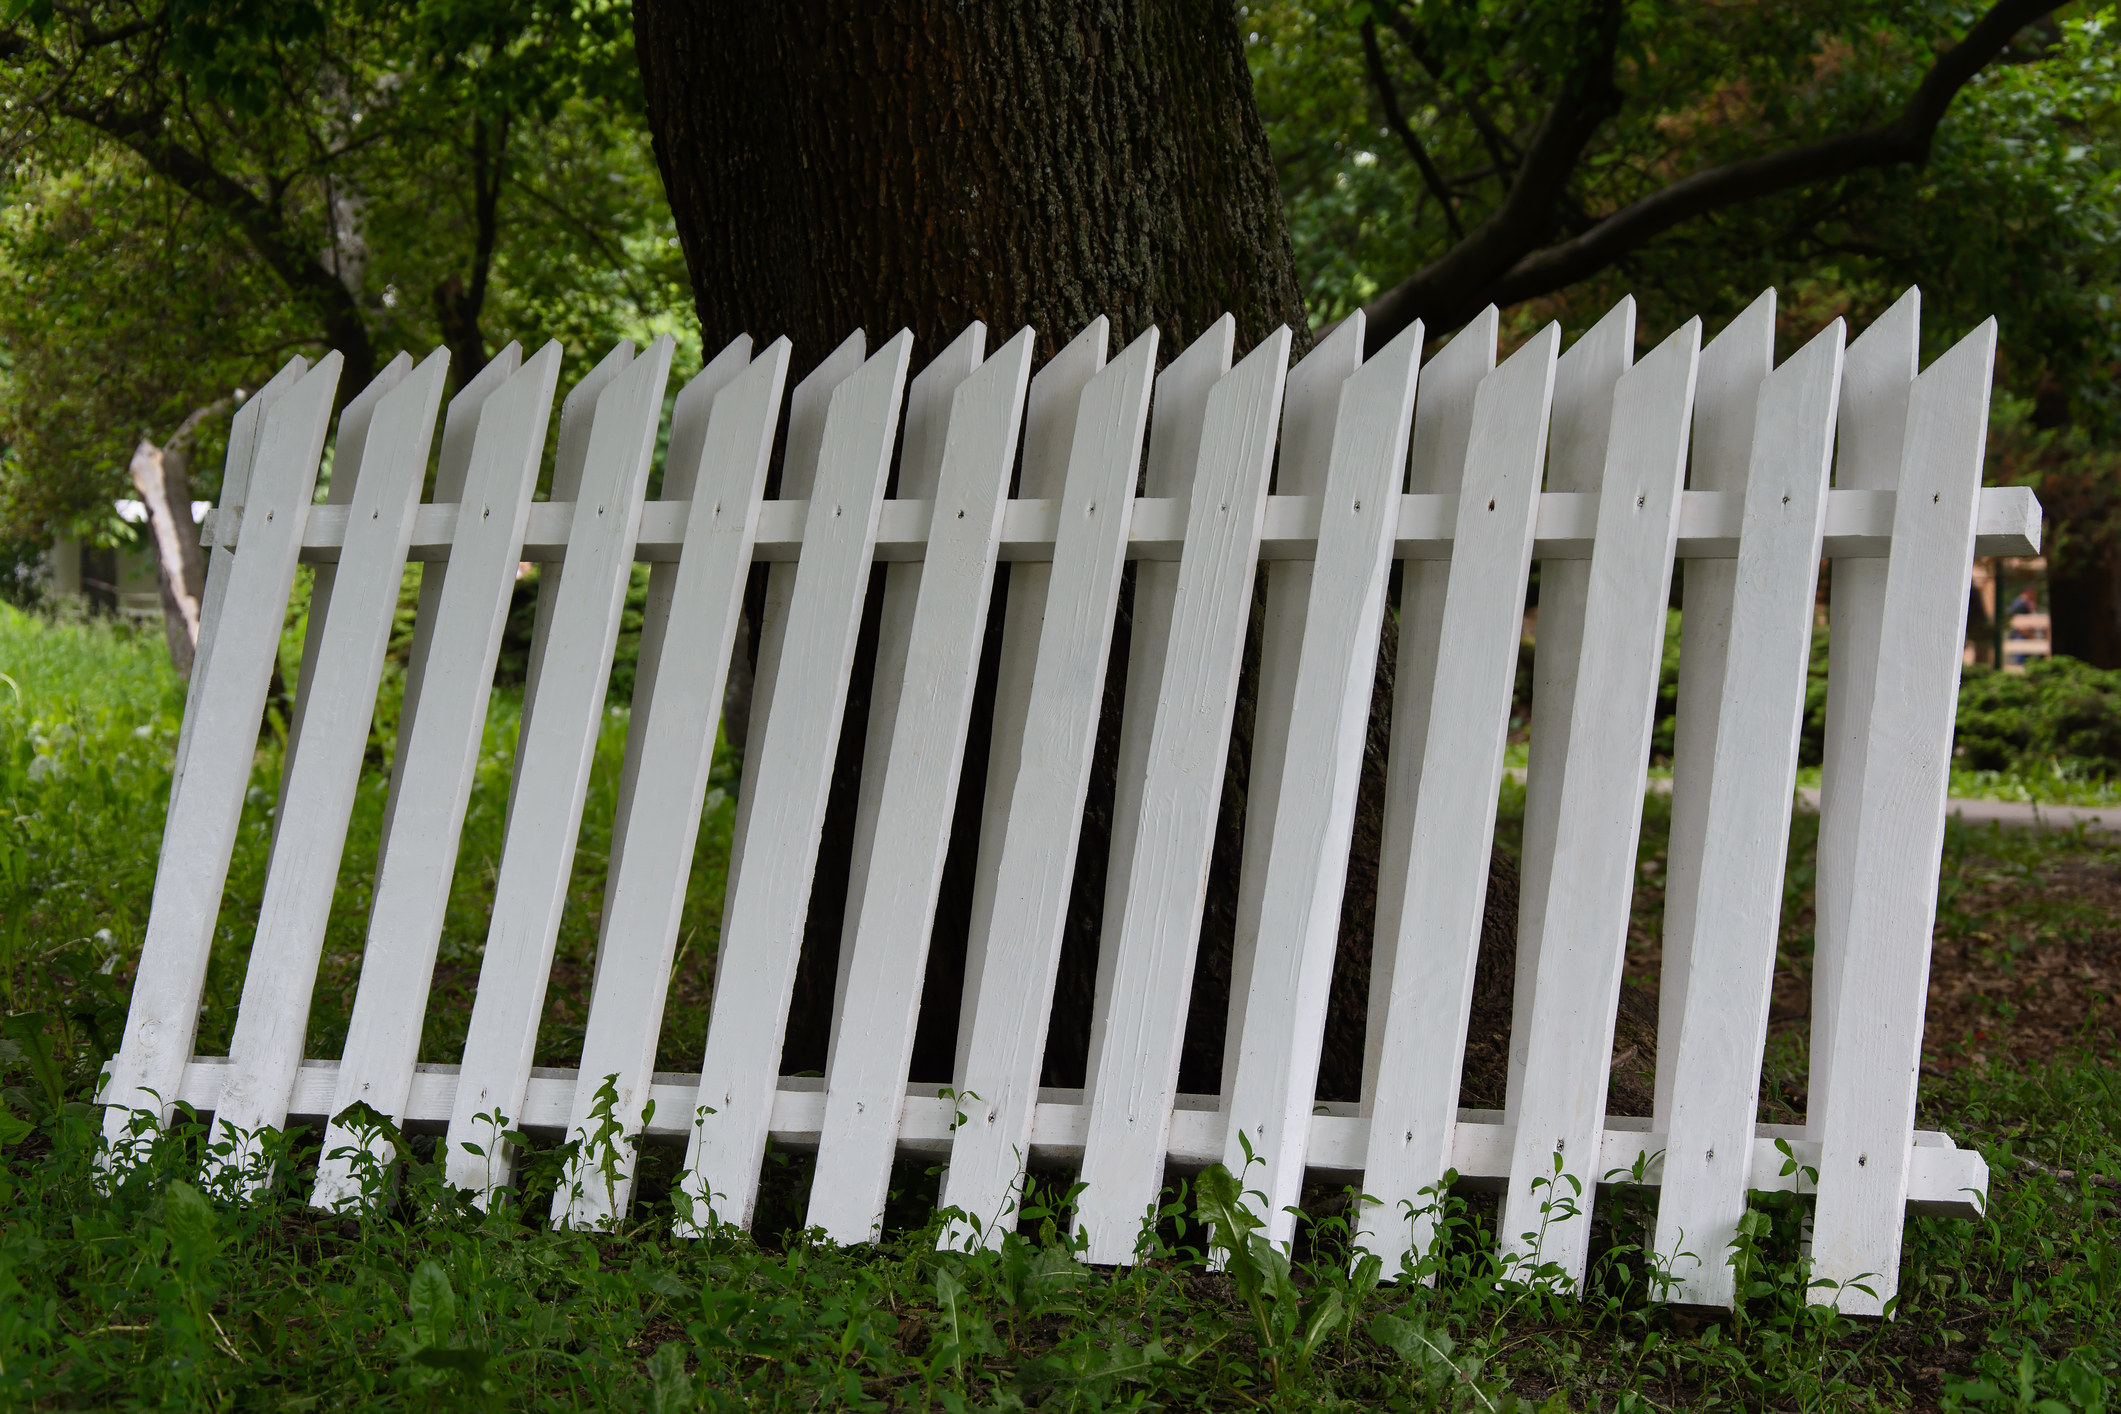 Section of the white wooden fence